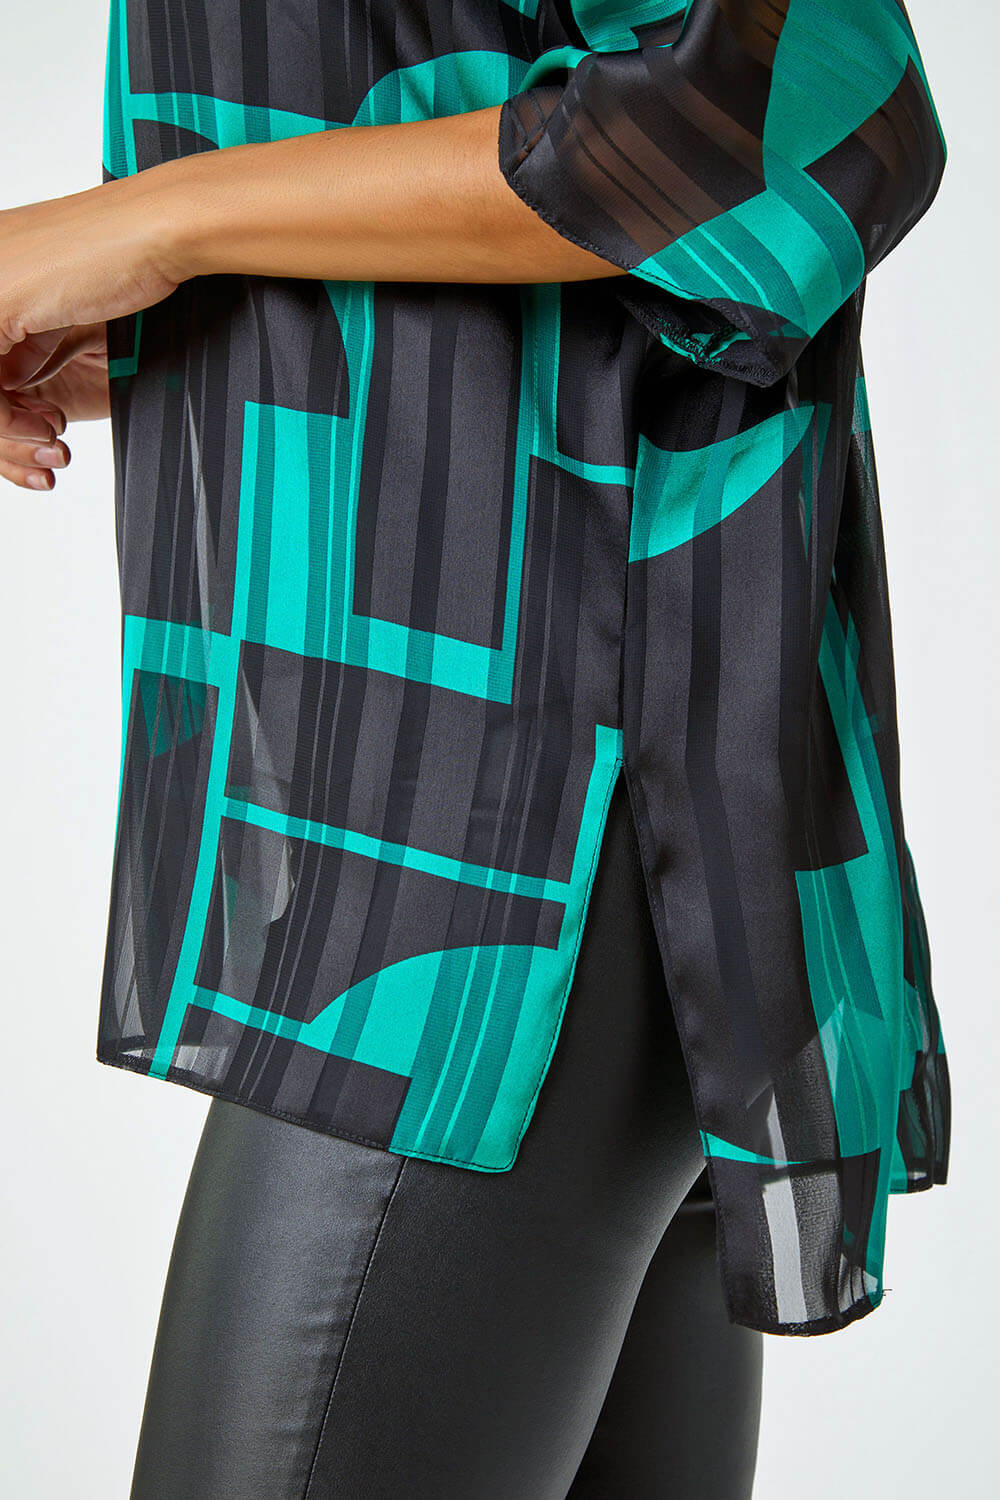 Green Relaxed Graphic Satin Overlay Top , Image 5 of 5